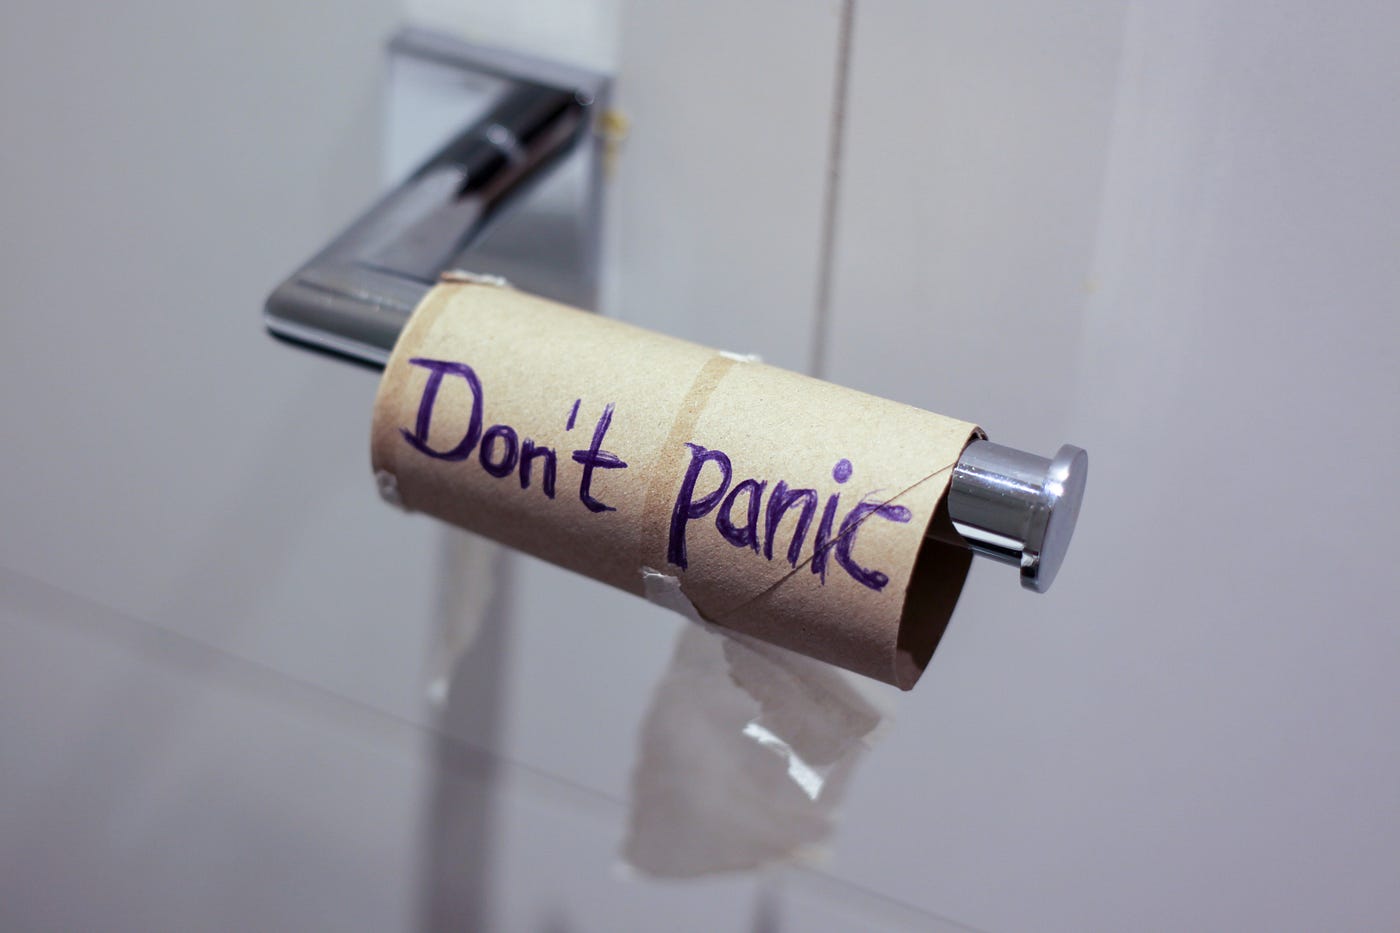 Empty toilet roll tube with the words “Don’t panic” written on it.